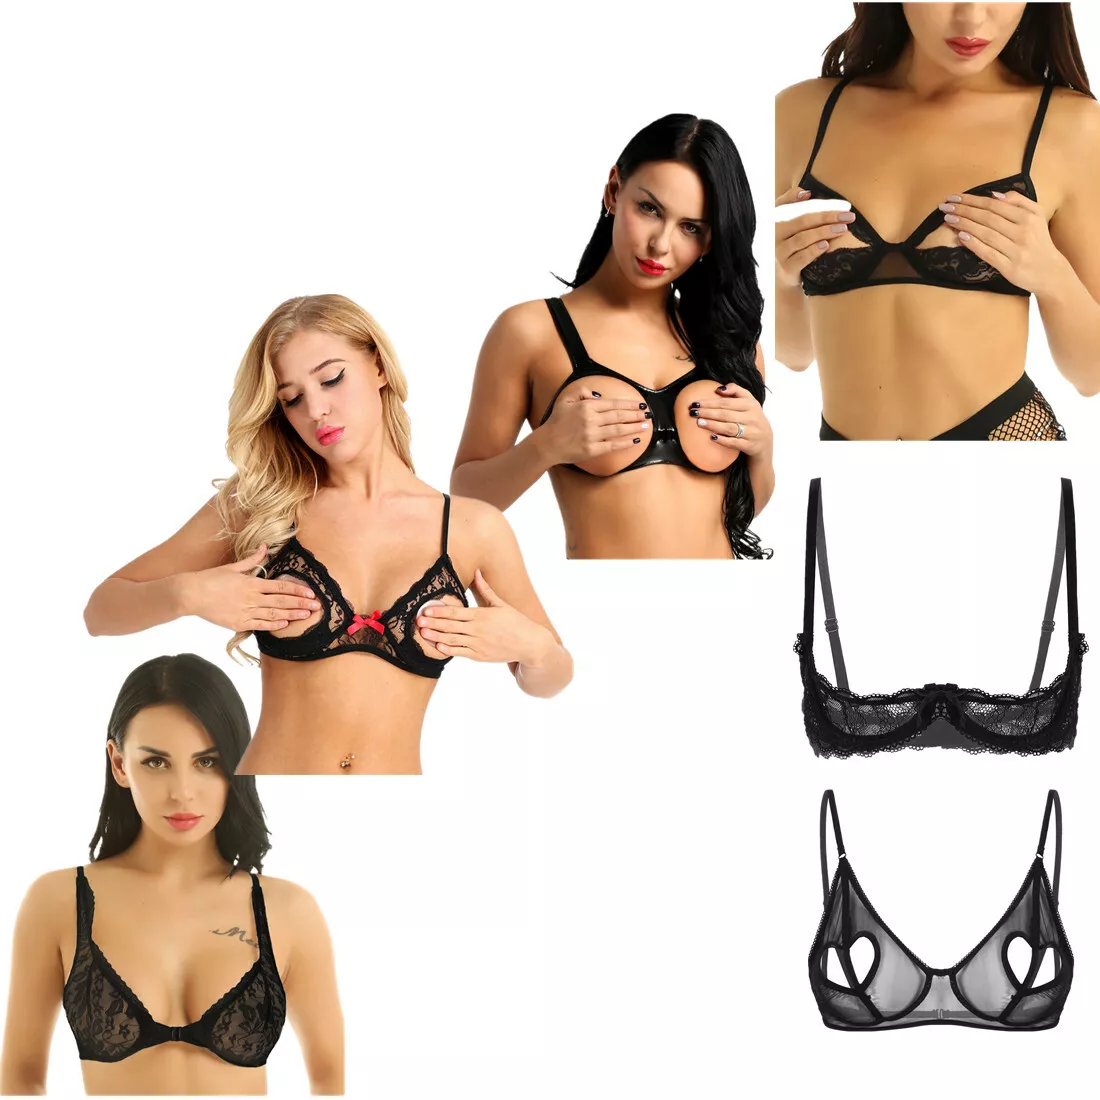 diego mendonca recommends best open cup bra for large breasts pic